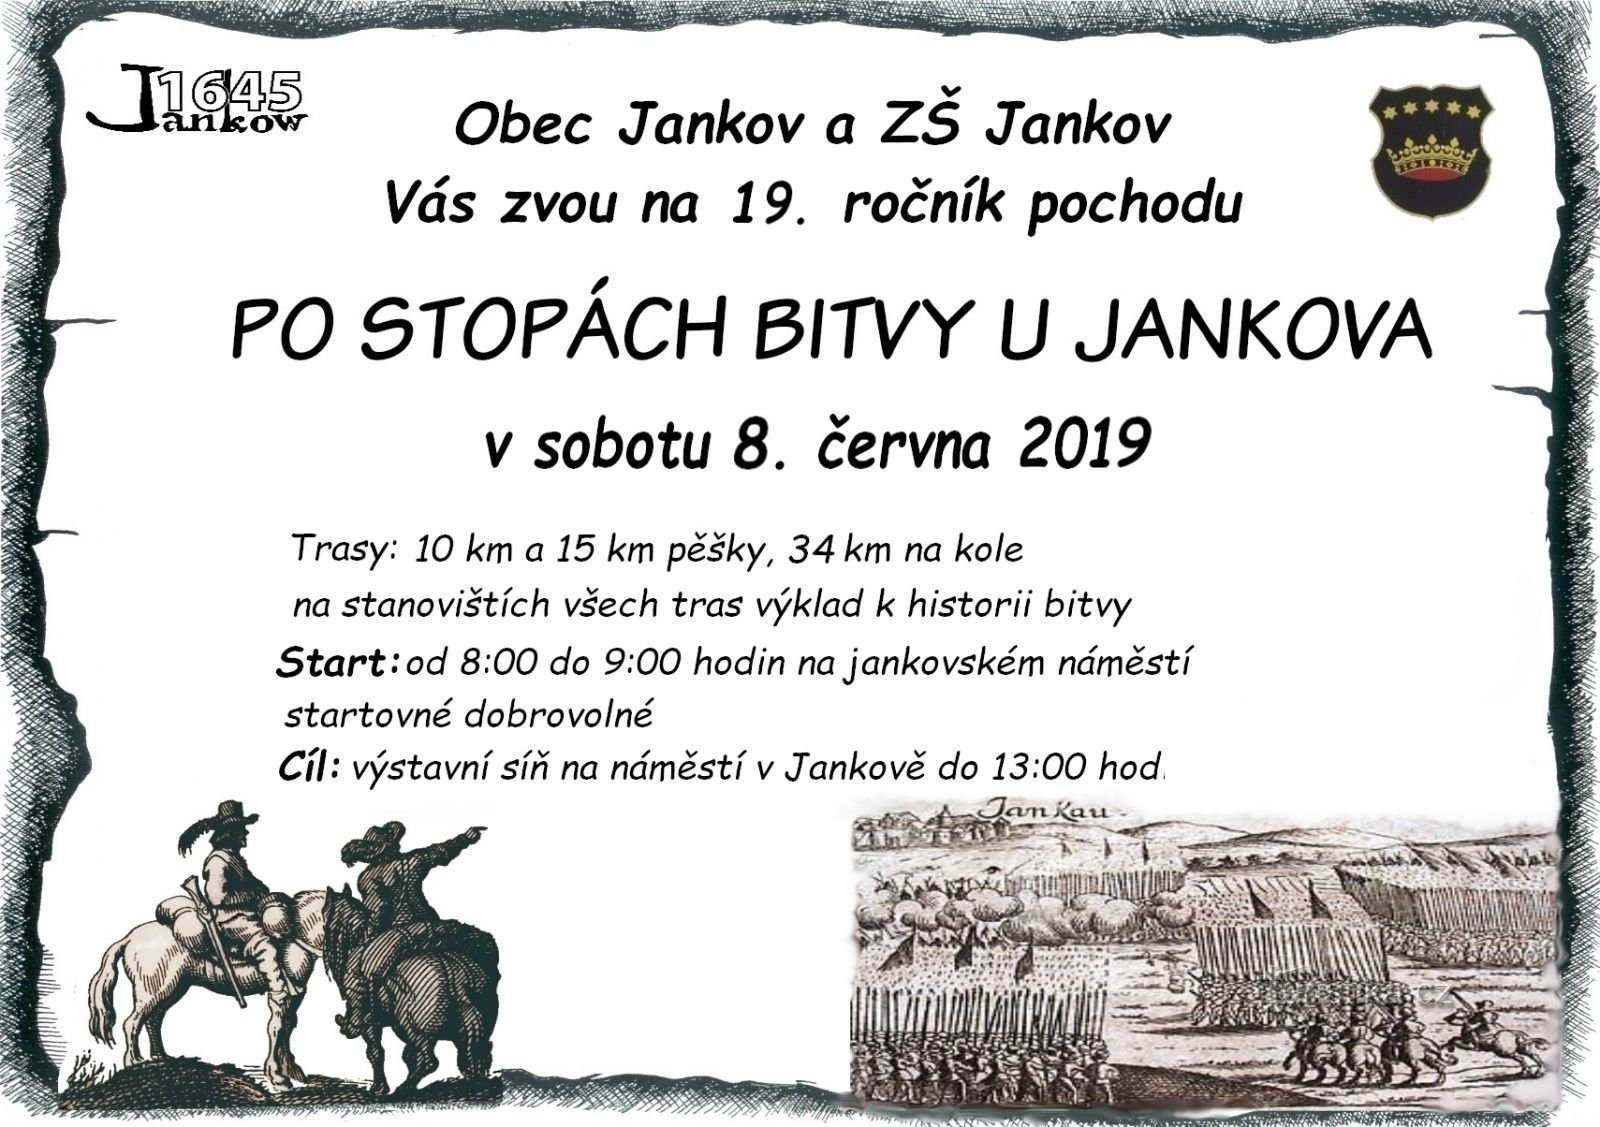 On the march Following the traces of the battle near Jankovo ​​and then on the Journey to the Prehistory